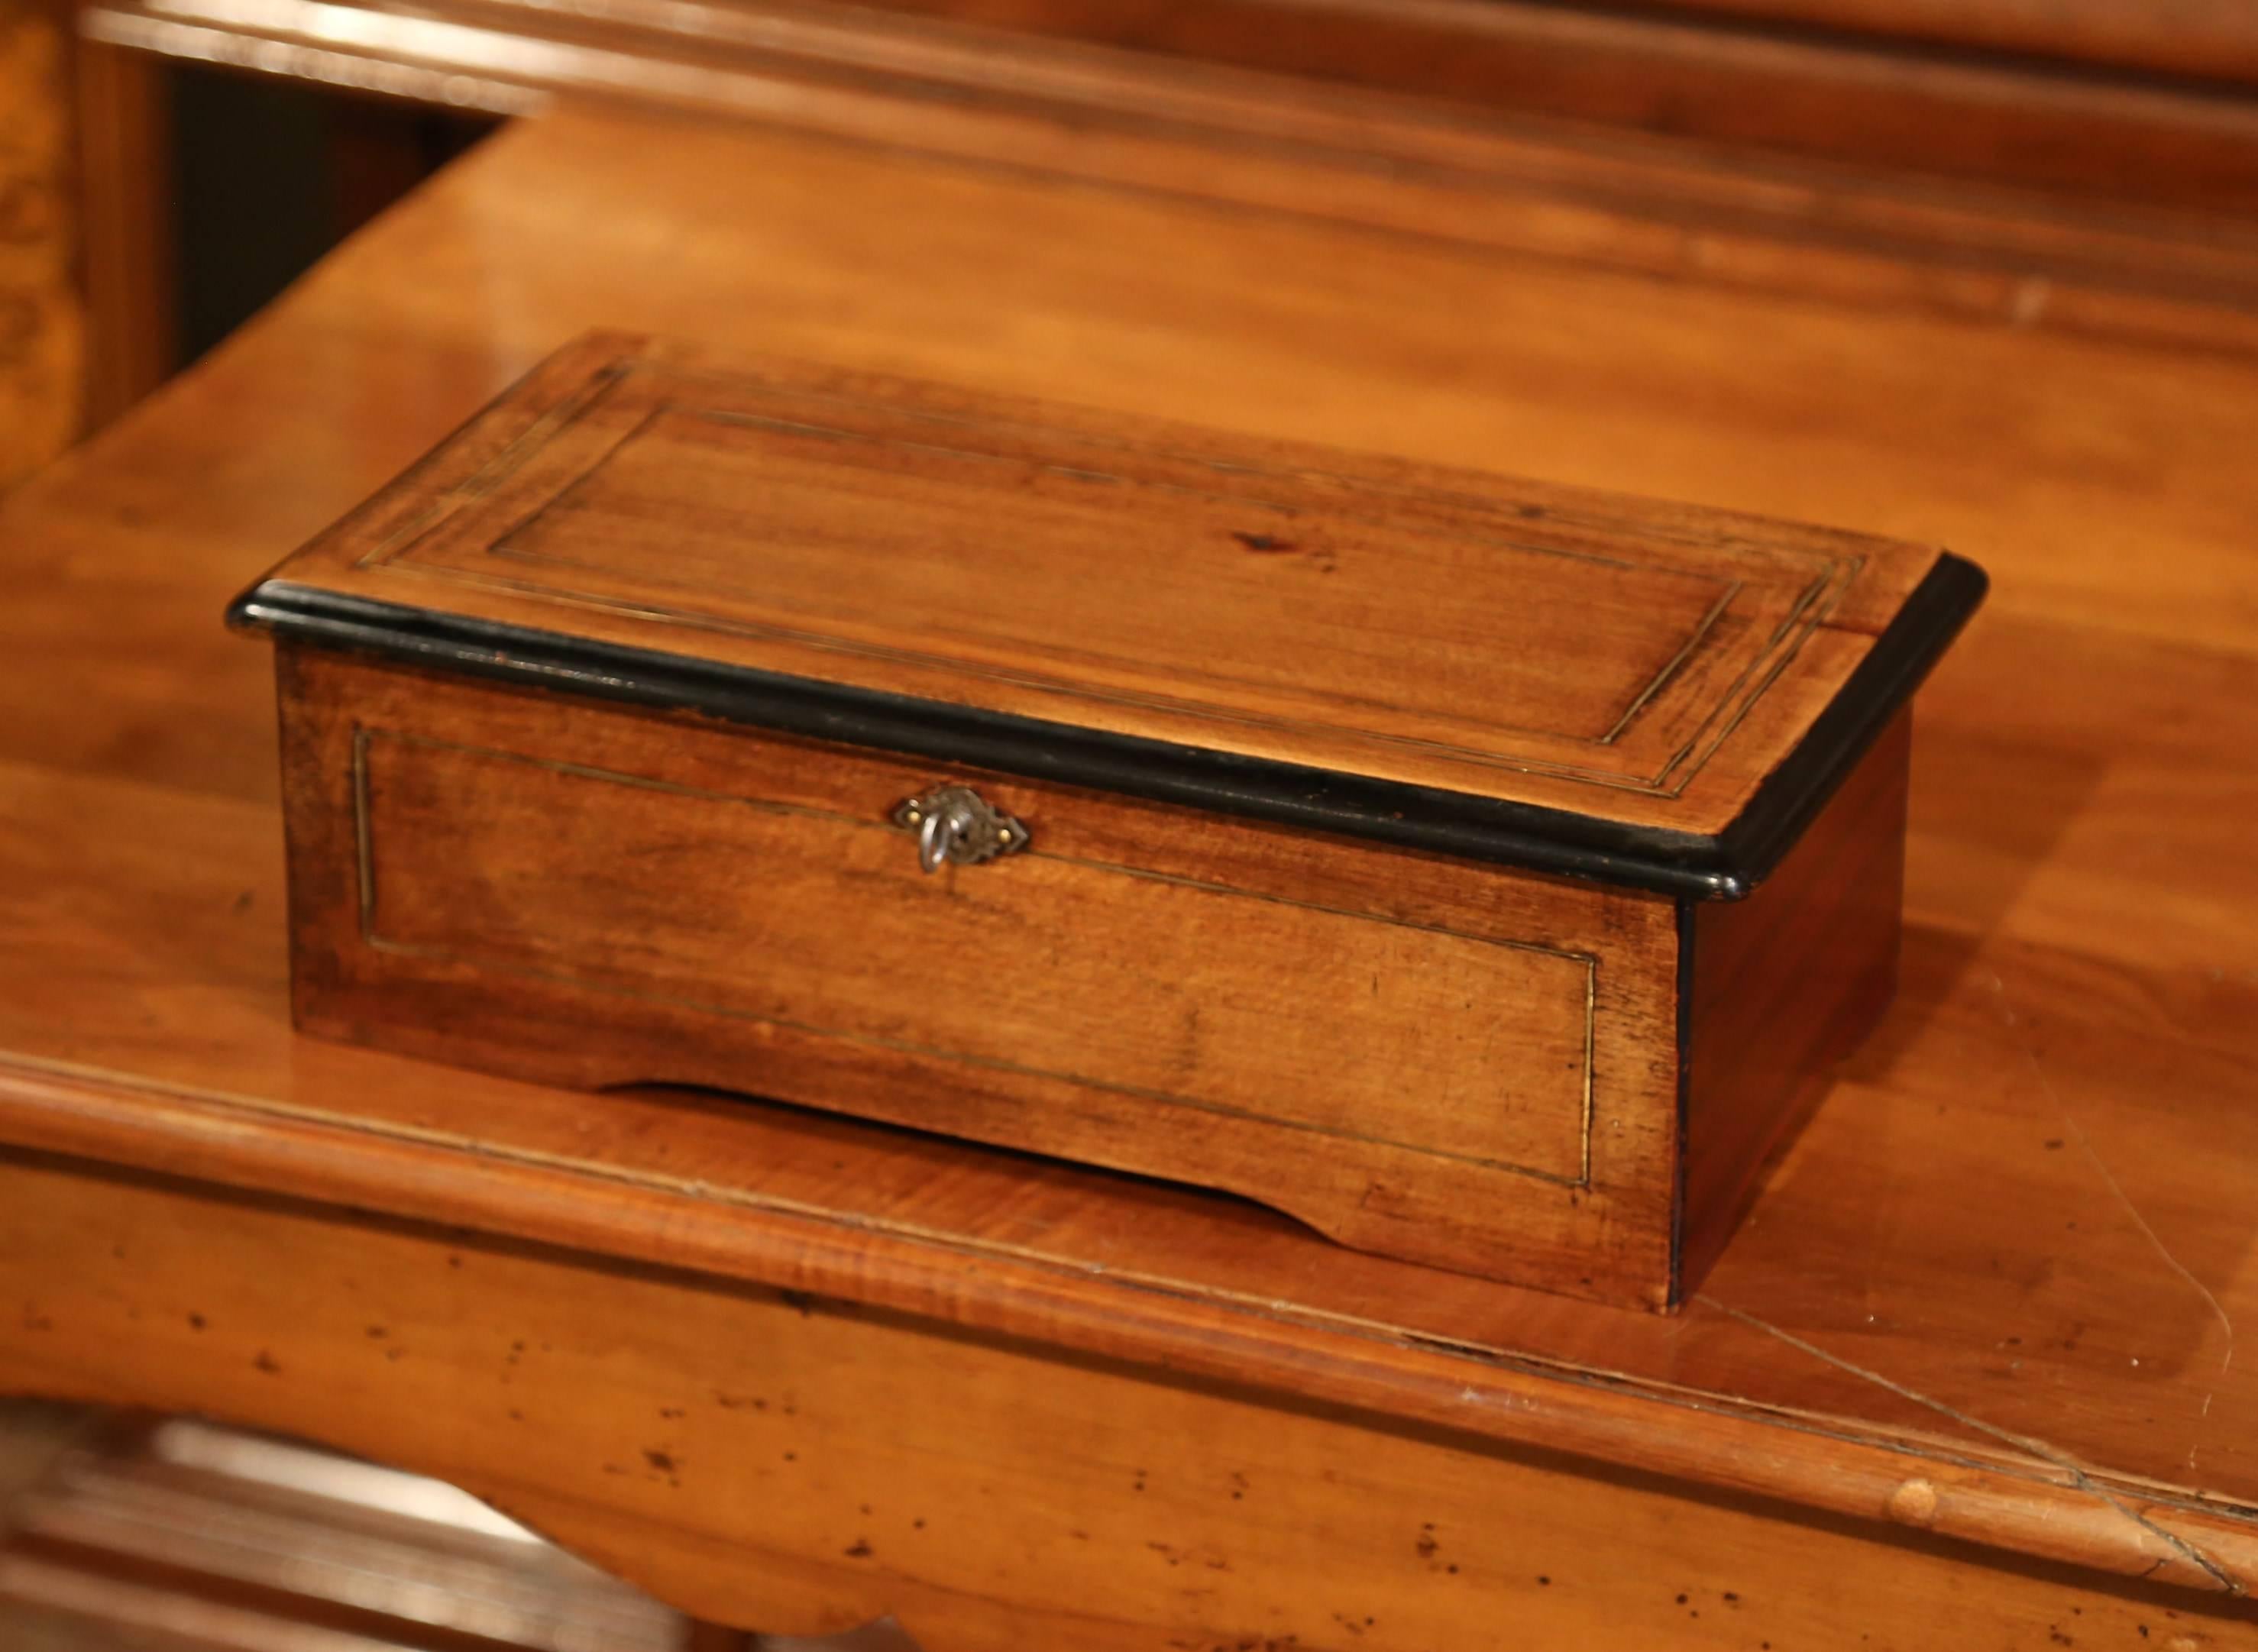 This beautiful, antique music box was crafted in France, circa 1860. The walnut music box has an inlay band and black border, which features six different airs. The hinged lid opens to reveal a cylinder with a comb under a small glass shelf. Inside